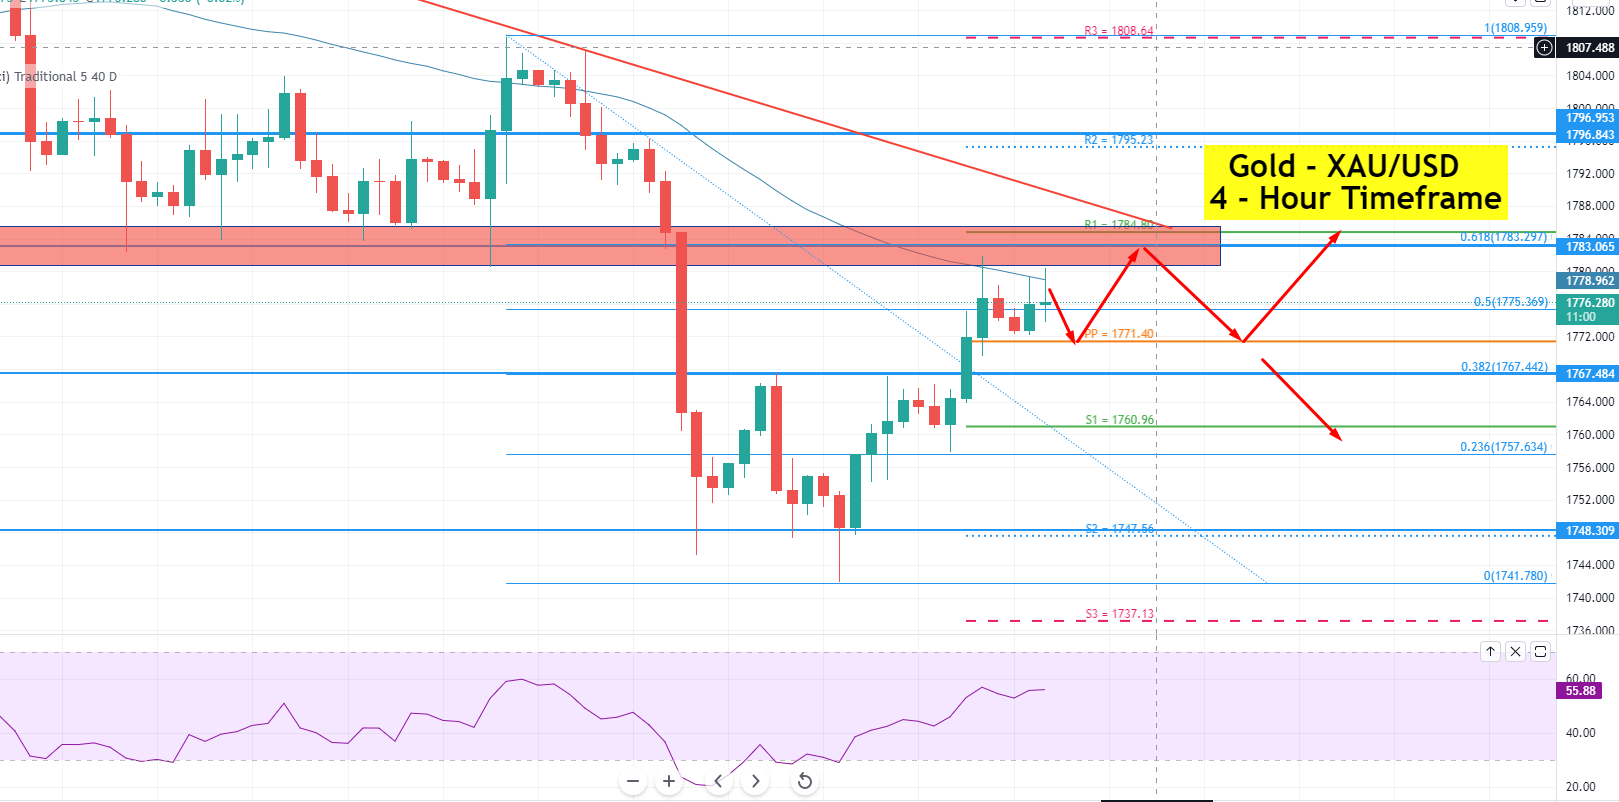 Sideways Trading Continues in Gold – Eyes on FOMC Meeting